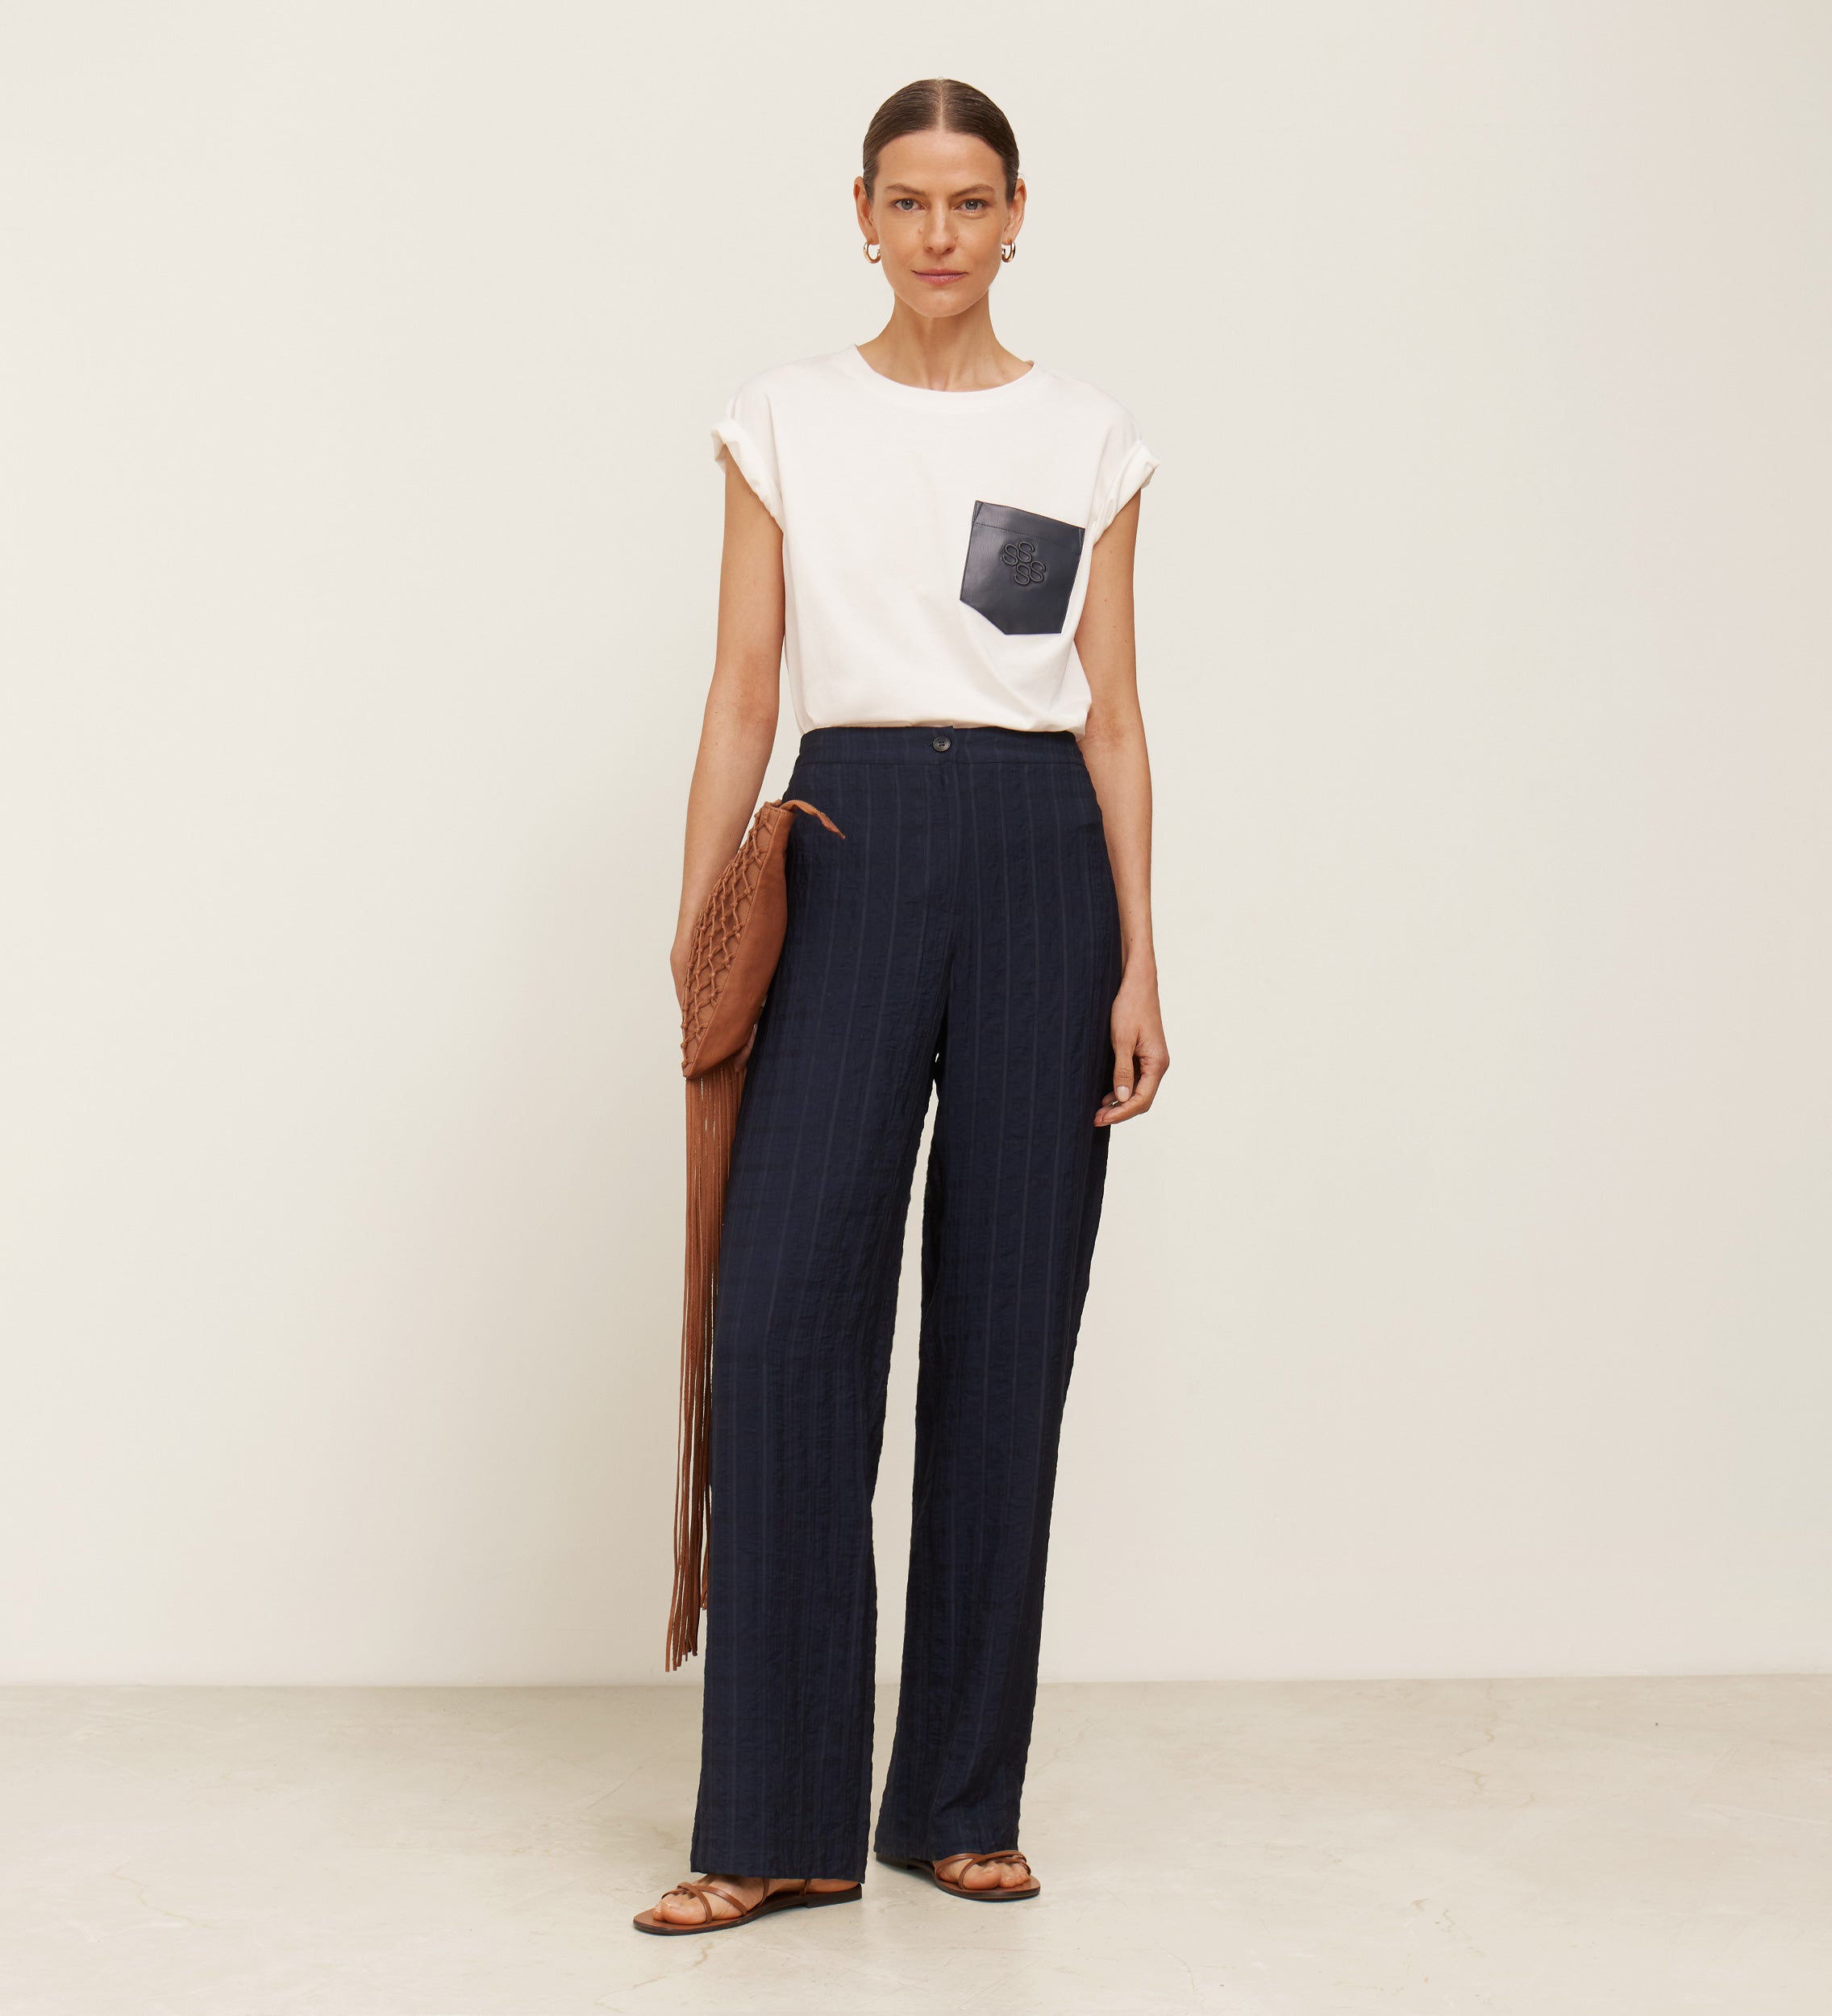 Wide textured trousers